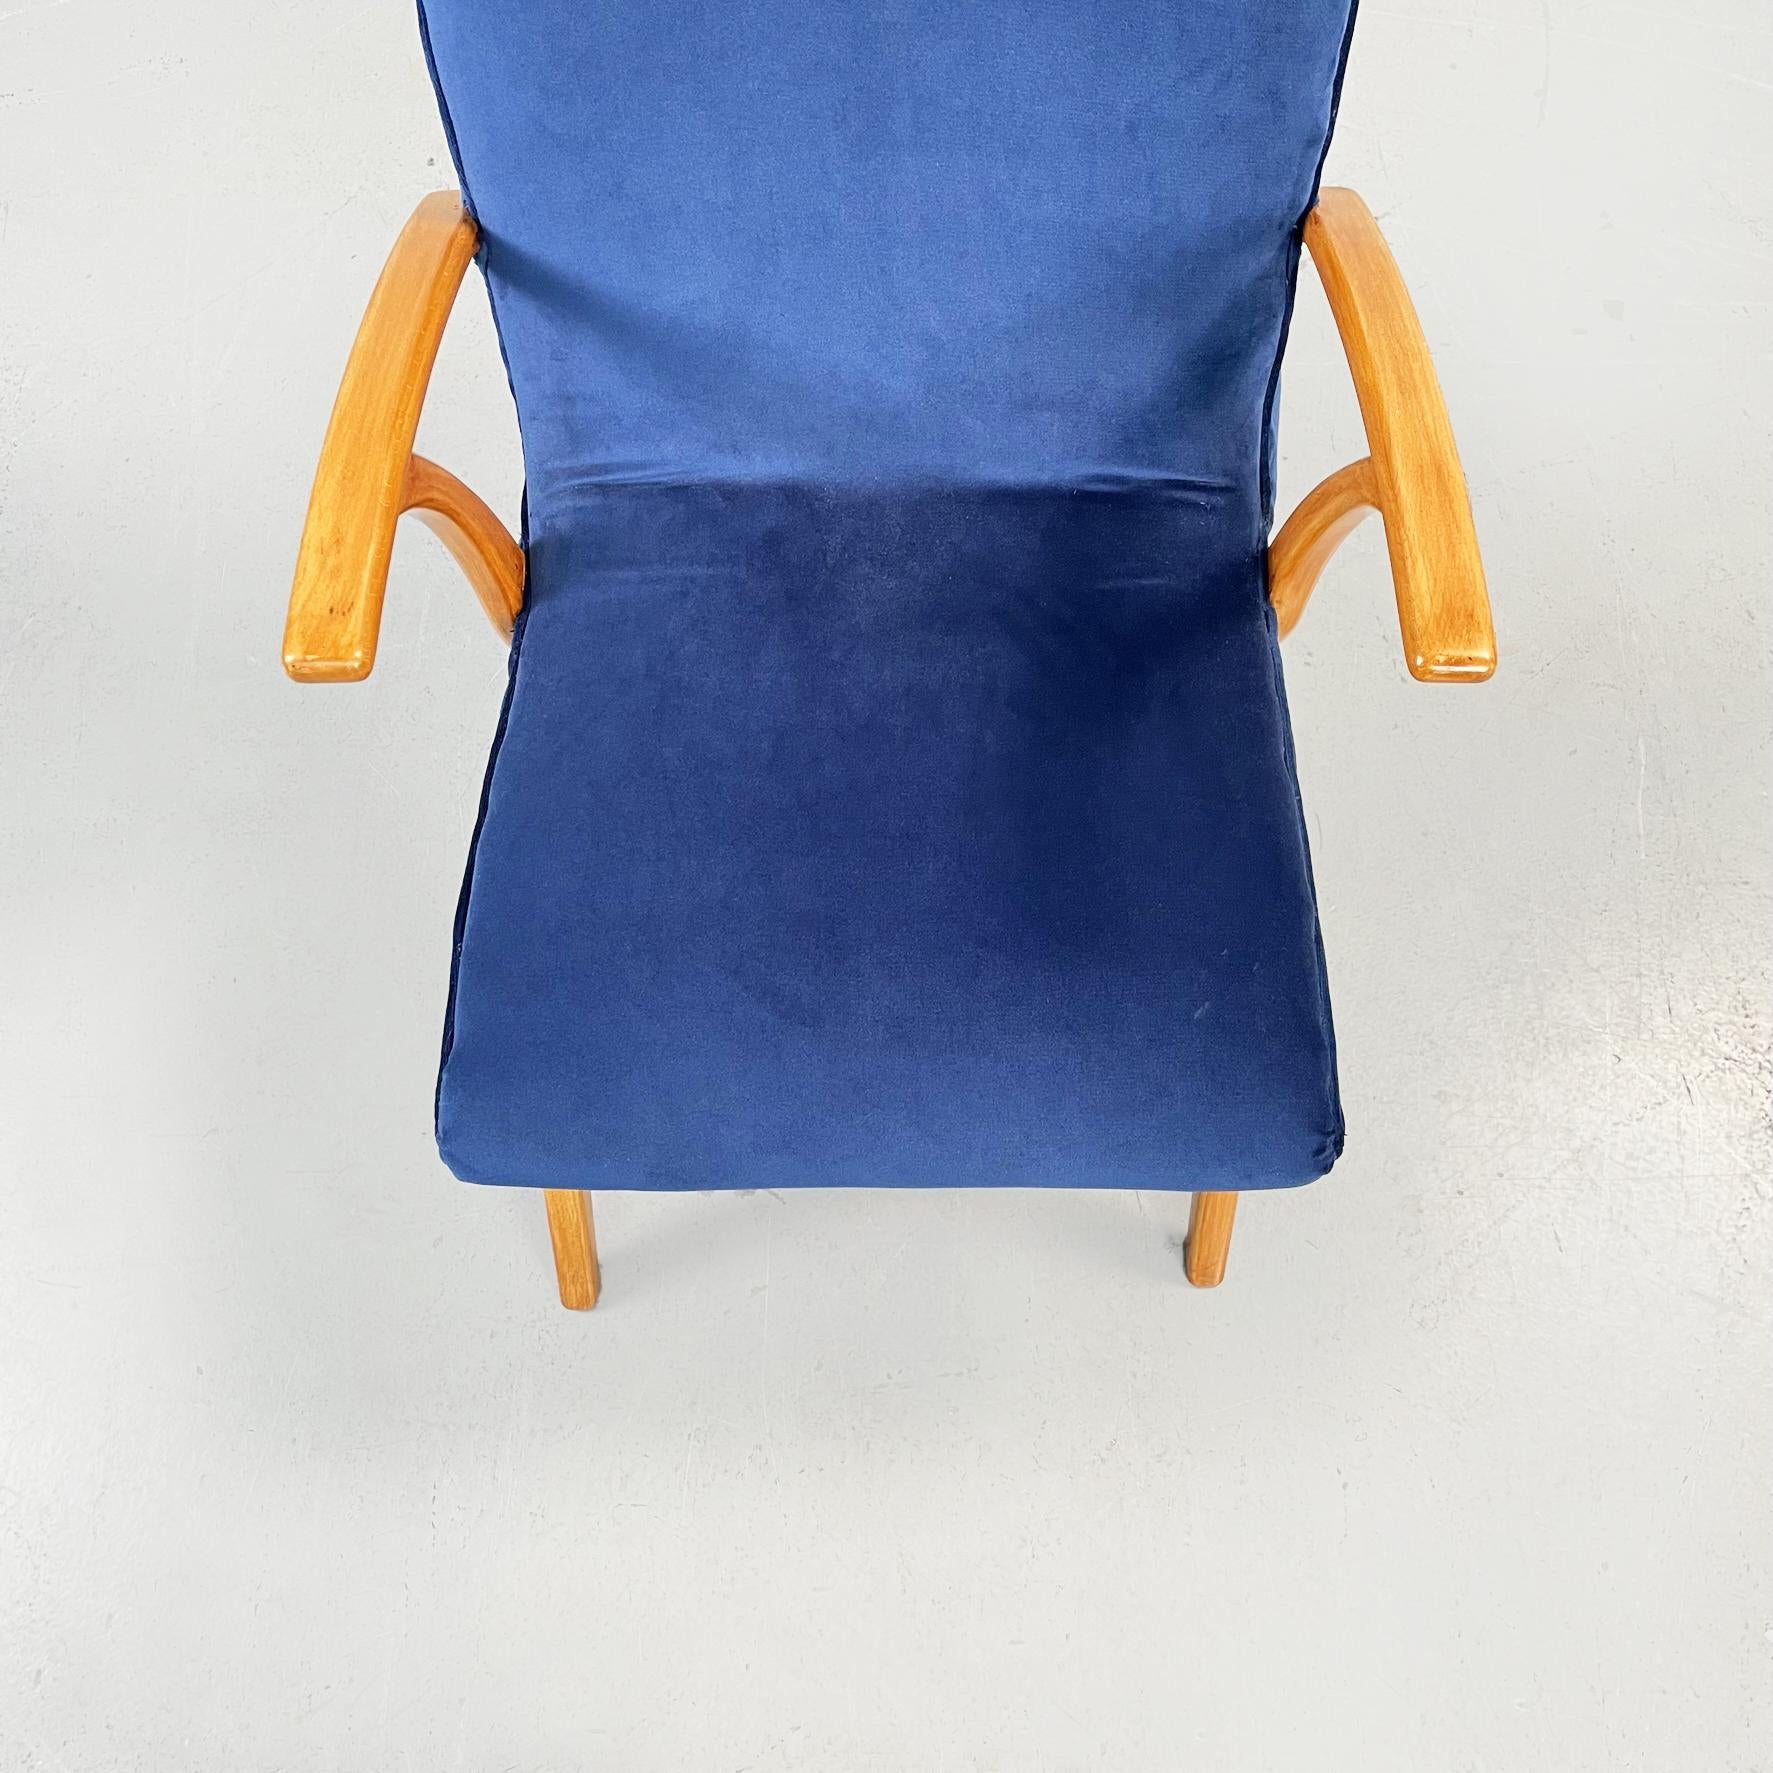 Danish Mid-Century Modern Armchair in Blue Velvet and Solid Wood, 1960s 3